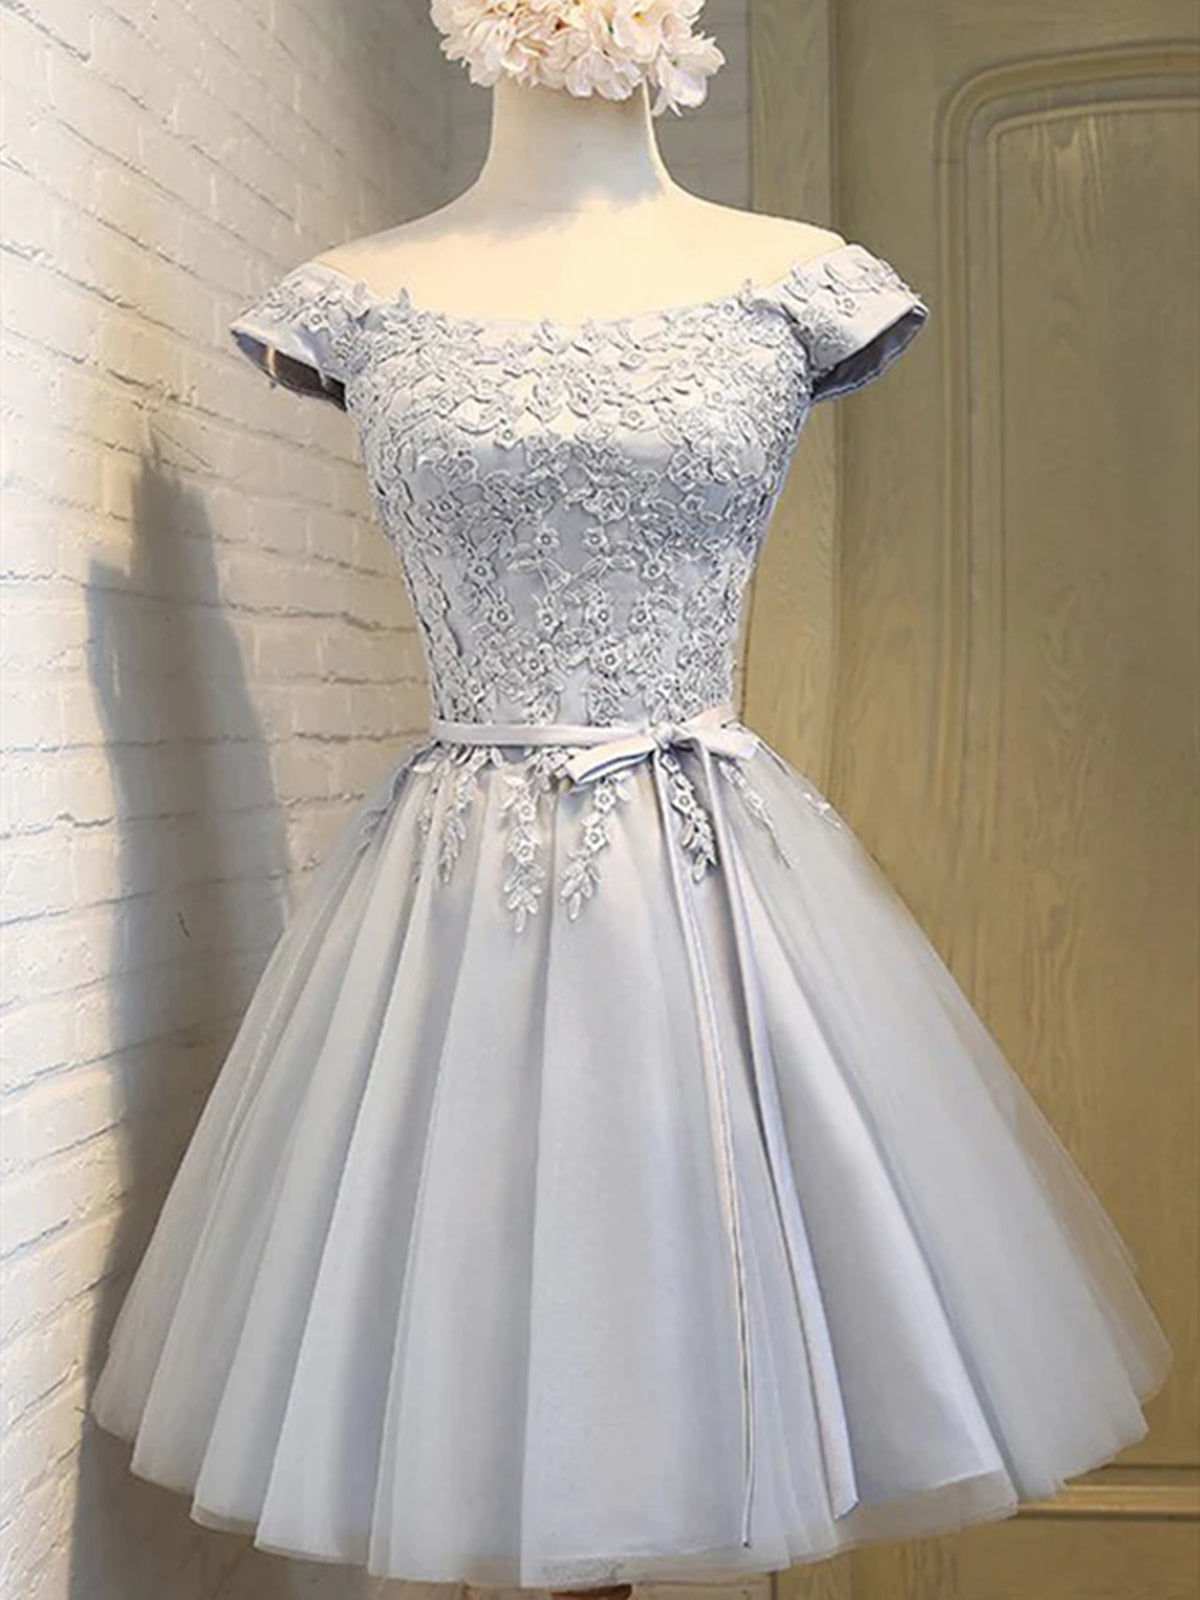 Party Outfit, Short Sleeves Silver Gray Lace Prom Dresses, Lace Graduation Homecoming Dresses